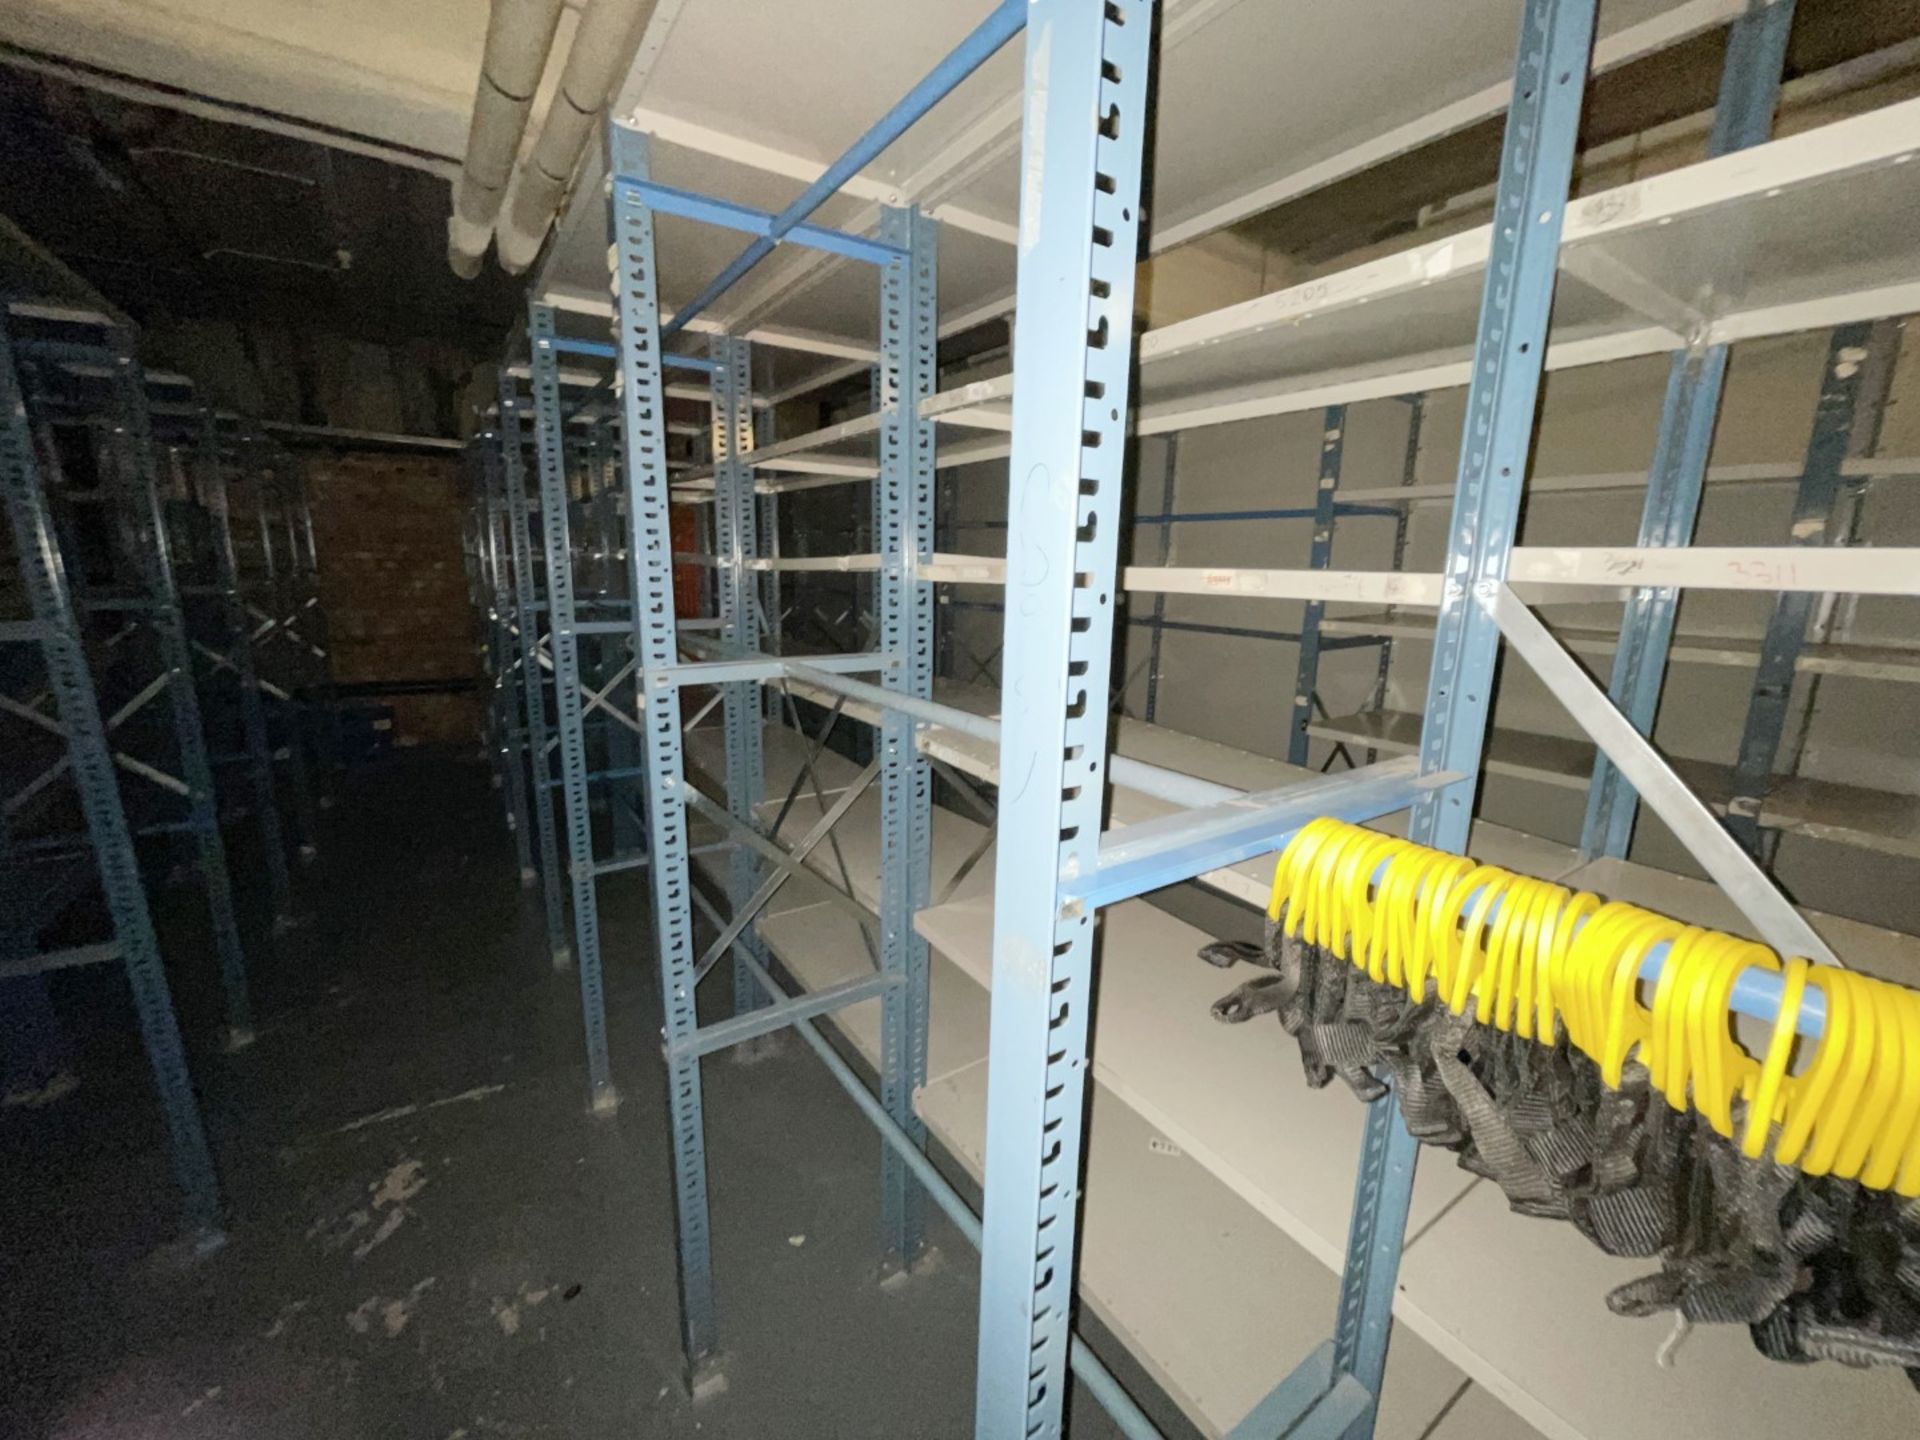 16 x Bays of Metal Warehouse Storage Shelving and Clothes Rails - Includes 8 x Shelving Bays and 8 x - Image 2 of 4